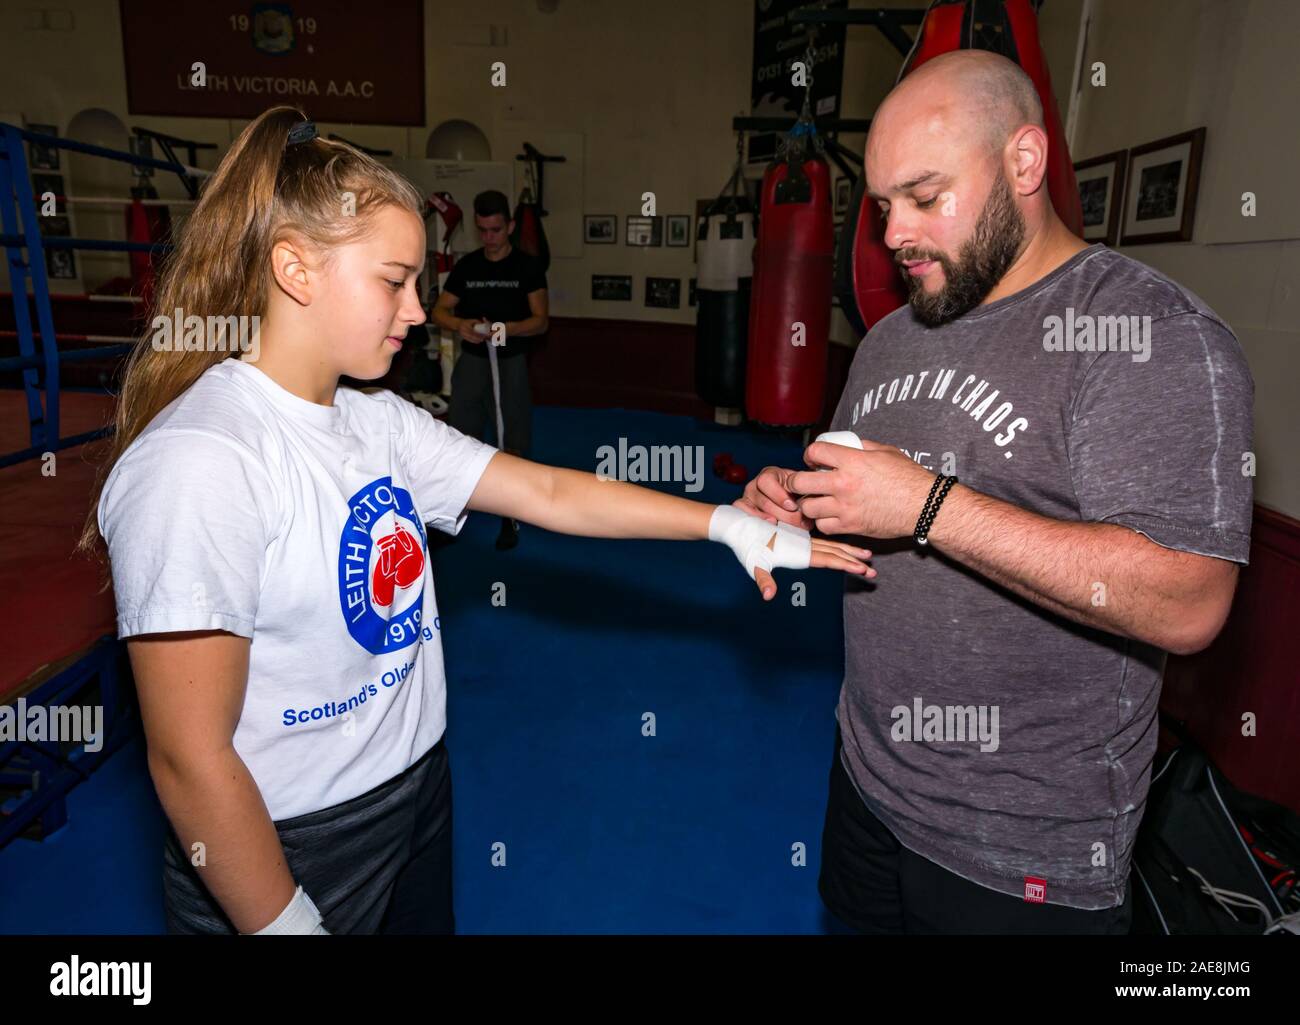 Frances Heath getting hands wrapped by coach Gary Young, Leith Victoria Boxing Club, Edinburgh, Scotland, UK Stock Photo